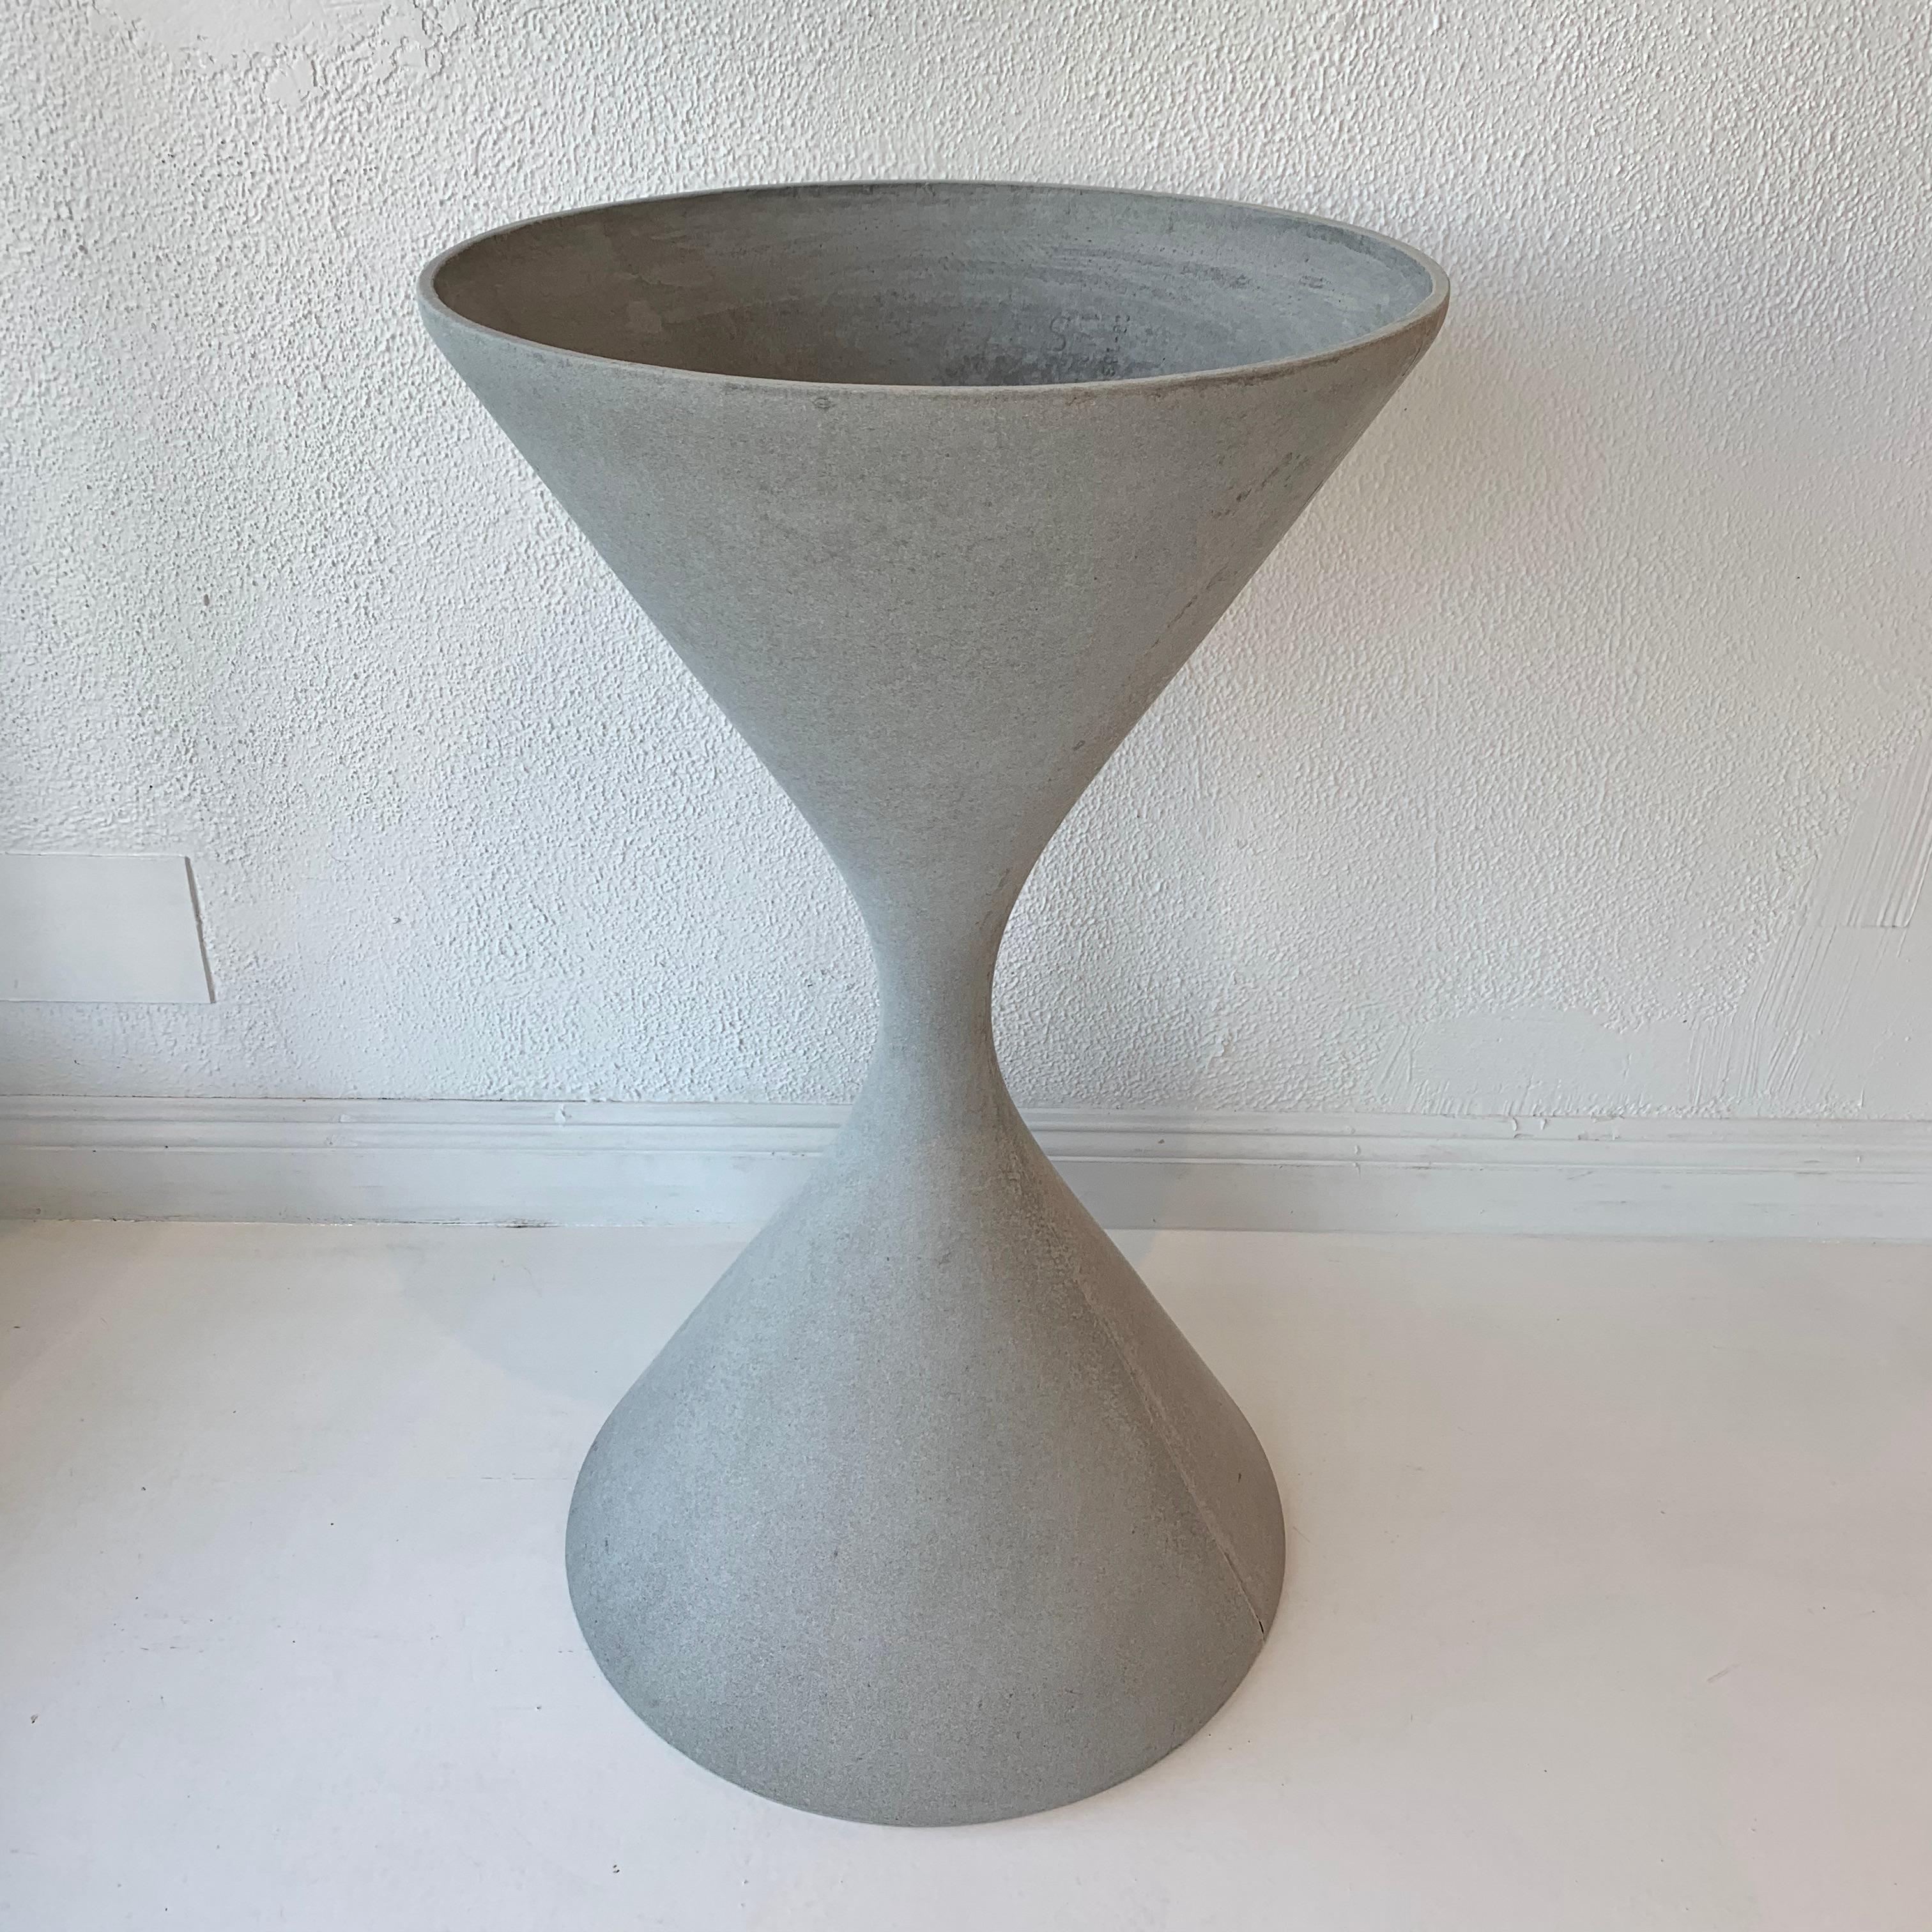 Swiss Willy Guhl New Production Spindel Hourglass Planters For Sale